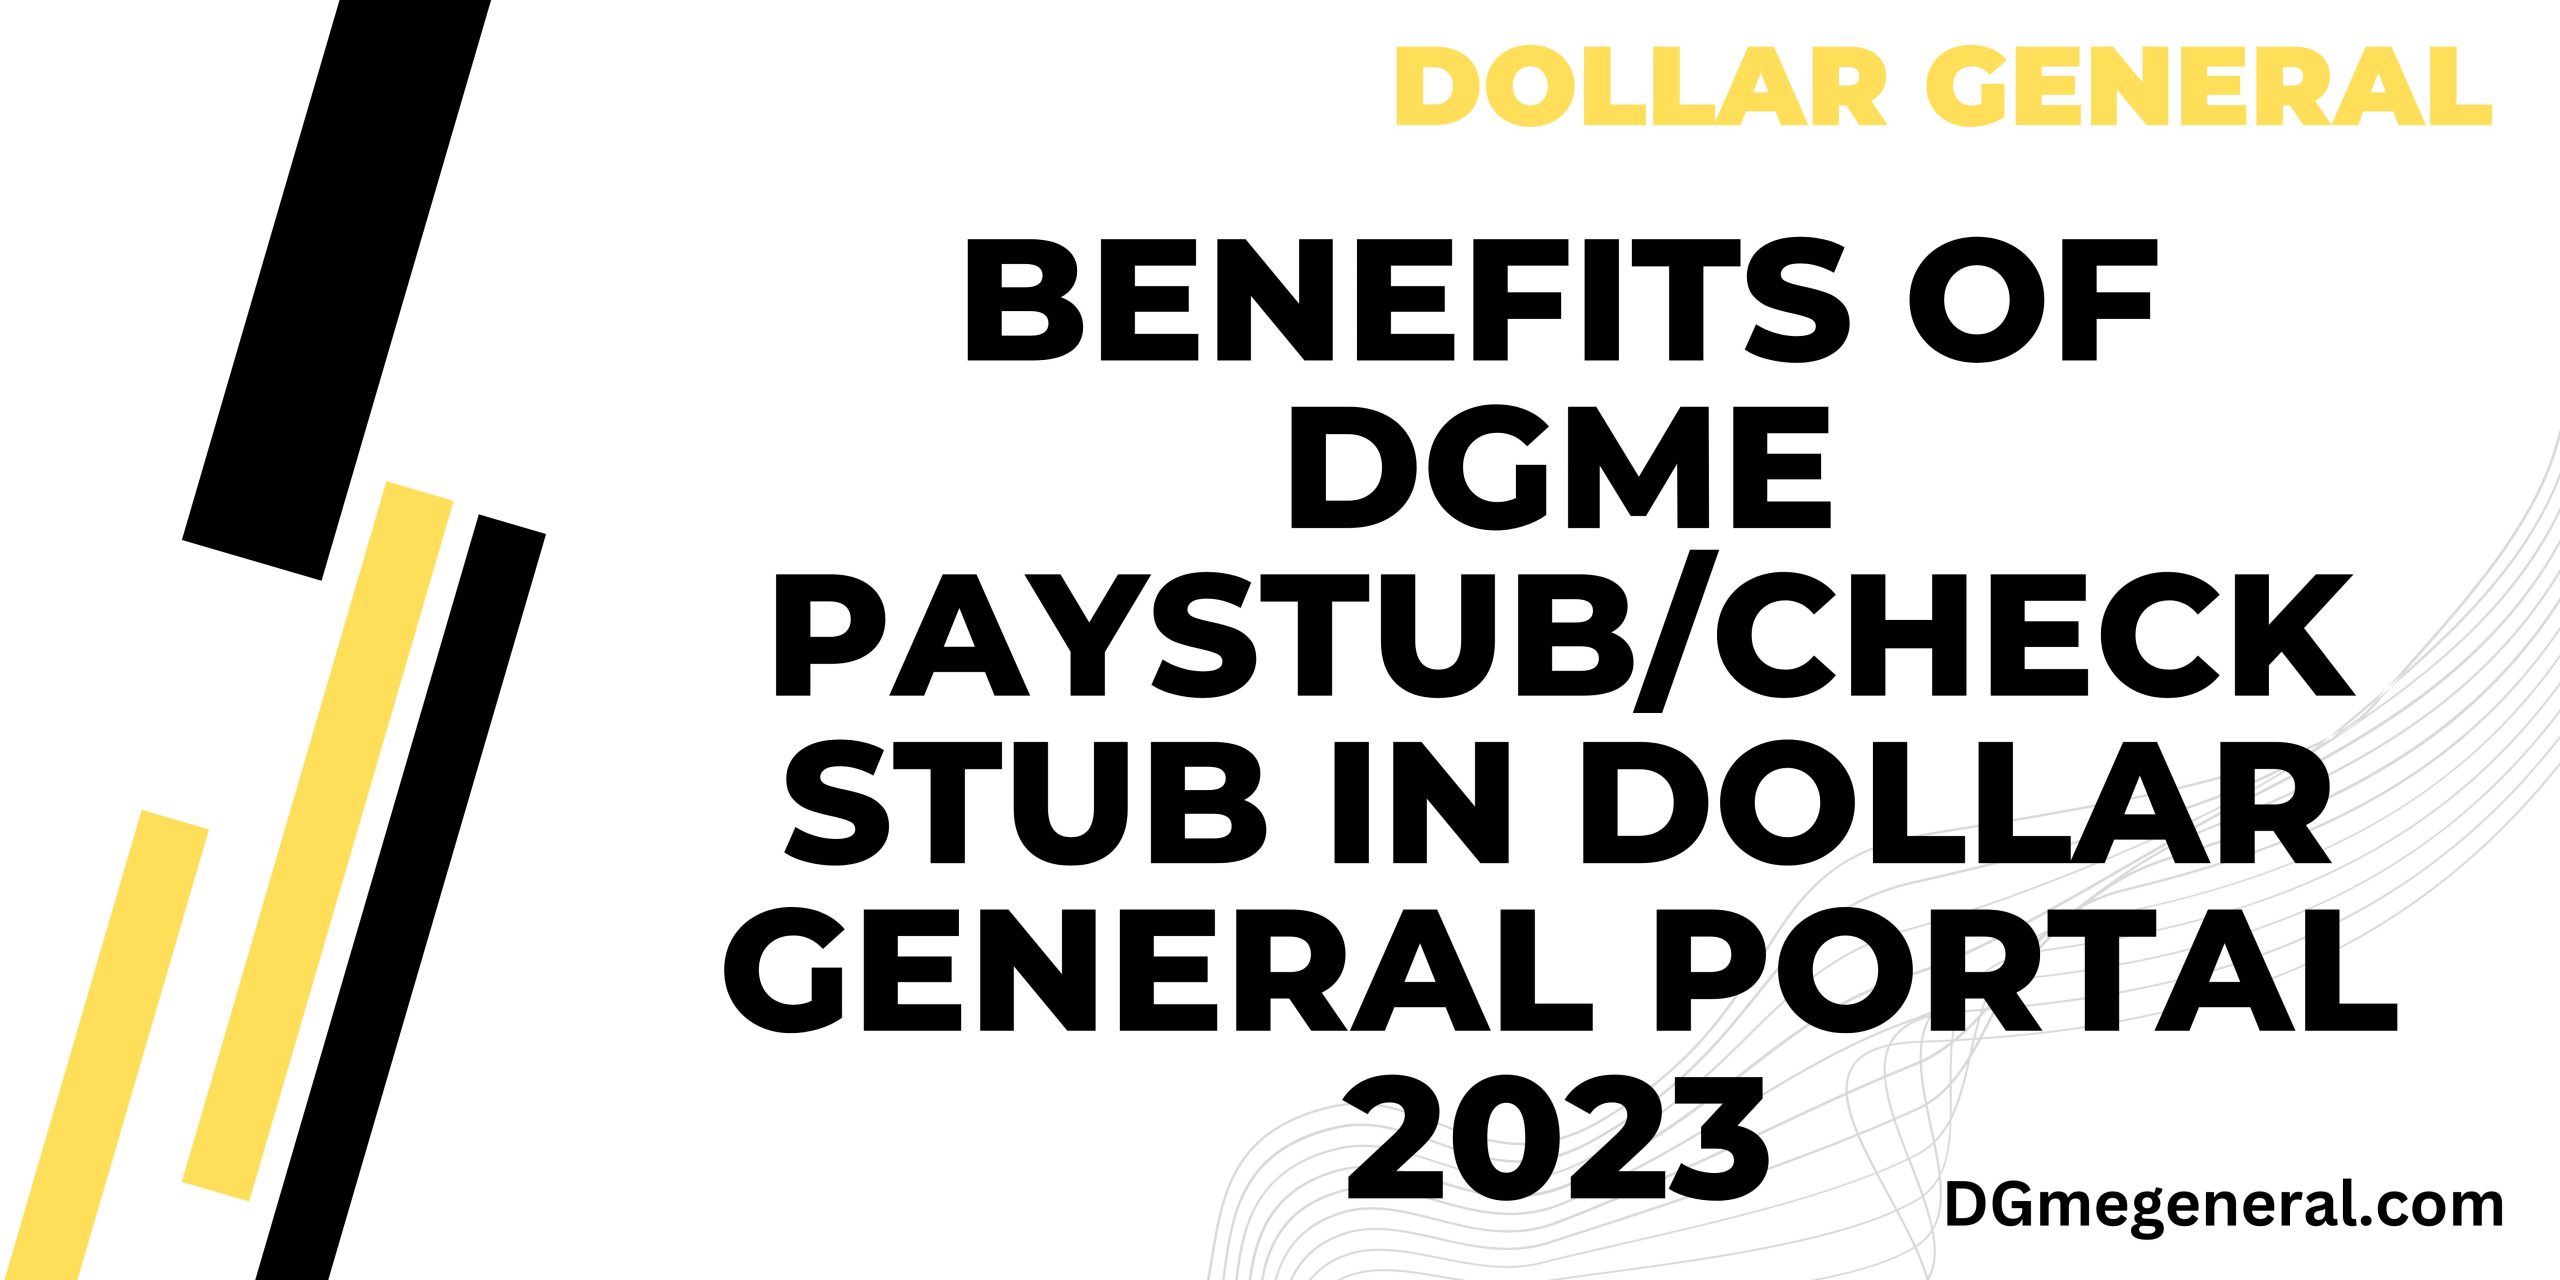 Benefits of DGME PaystubCheck Stub in Dollar General Portal 2023